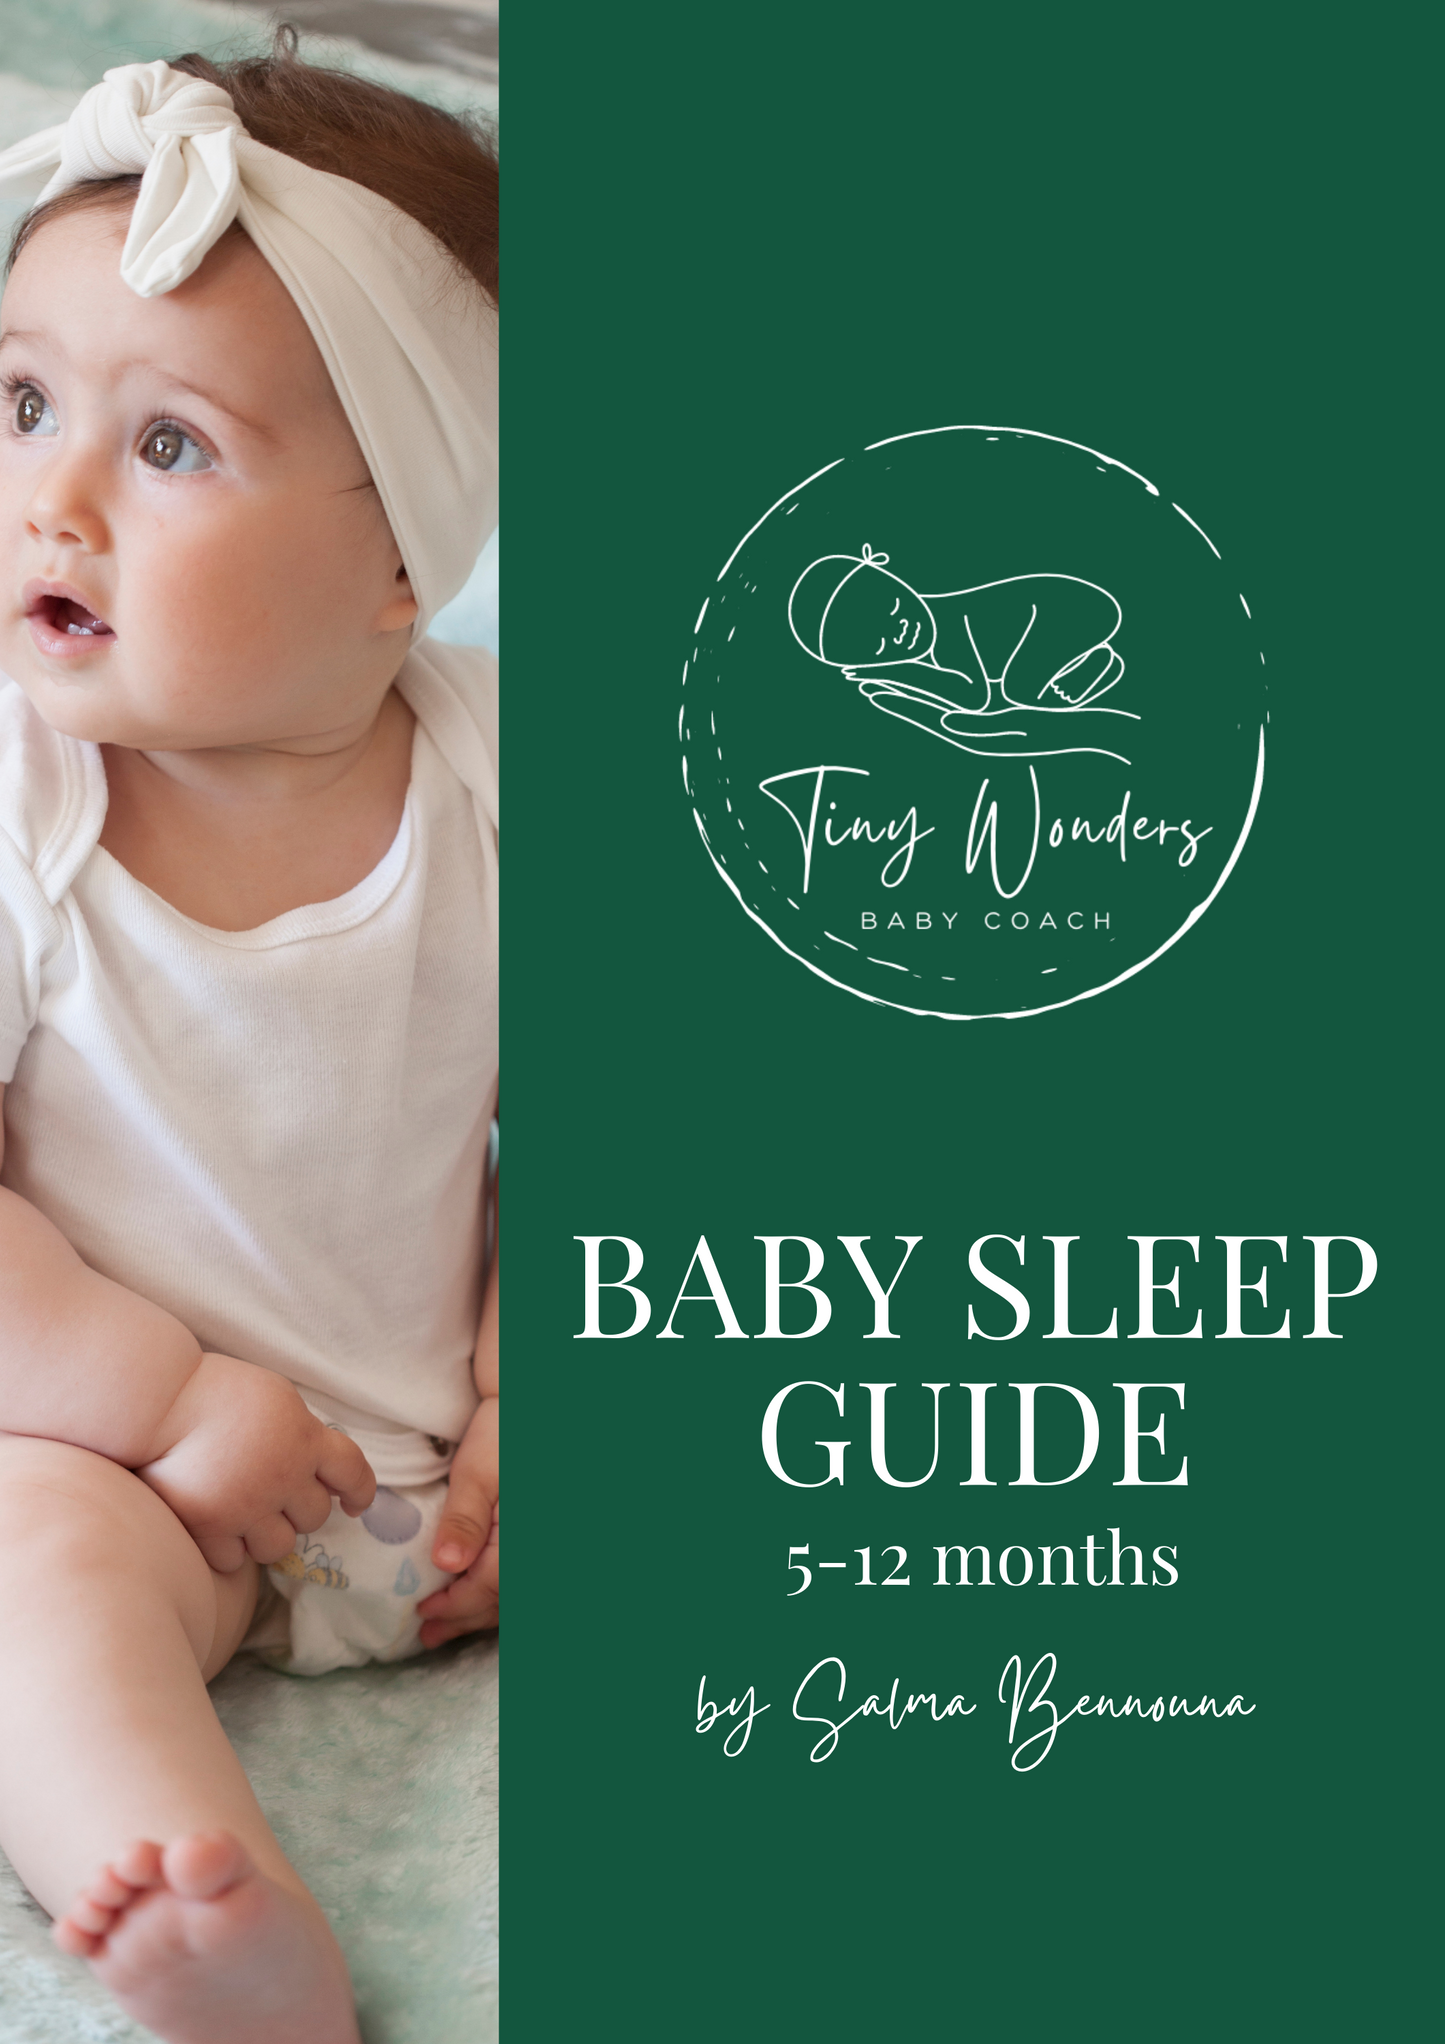 Baby Sleep Guide 5-12 months - PDF Download